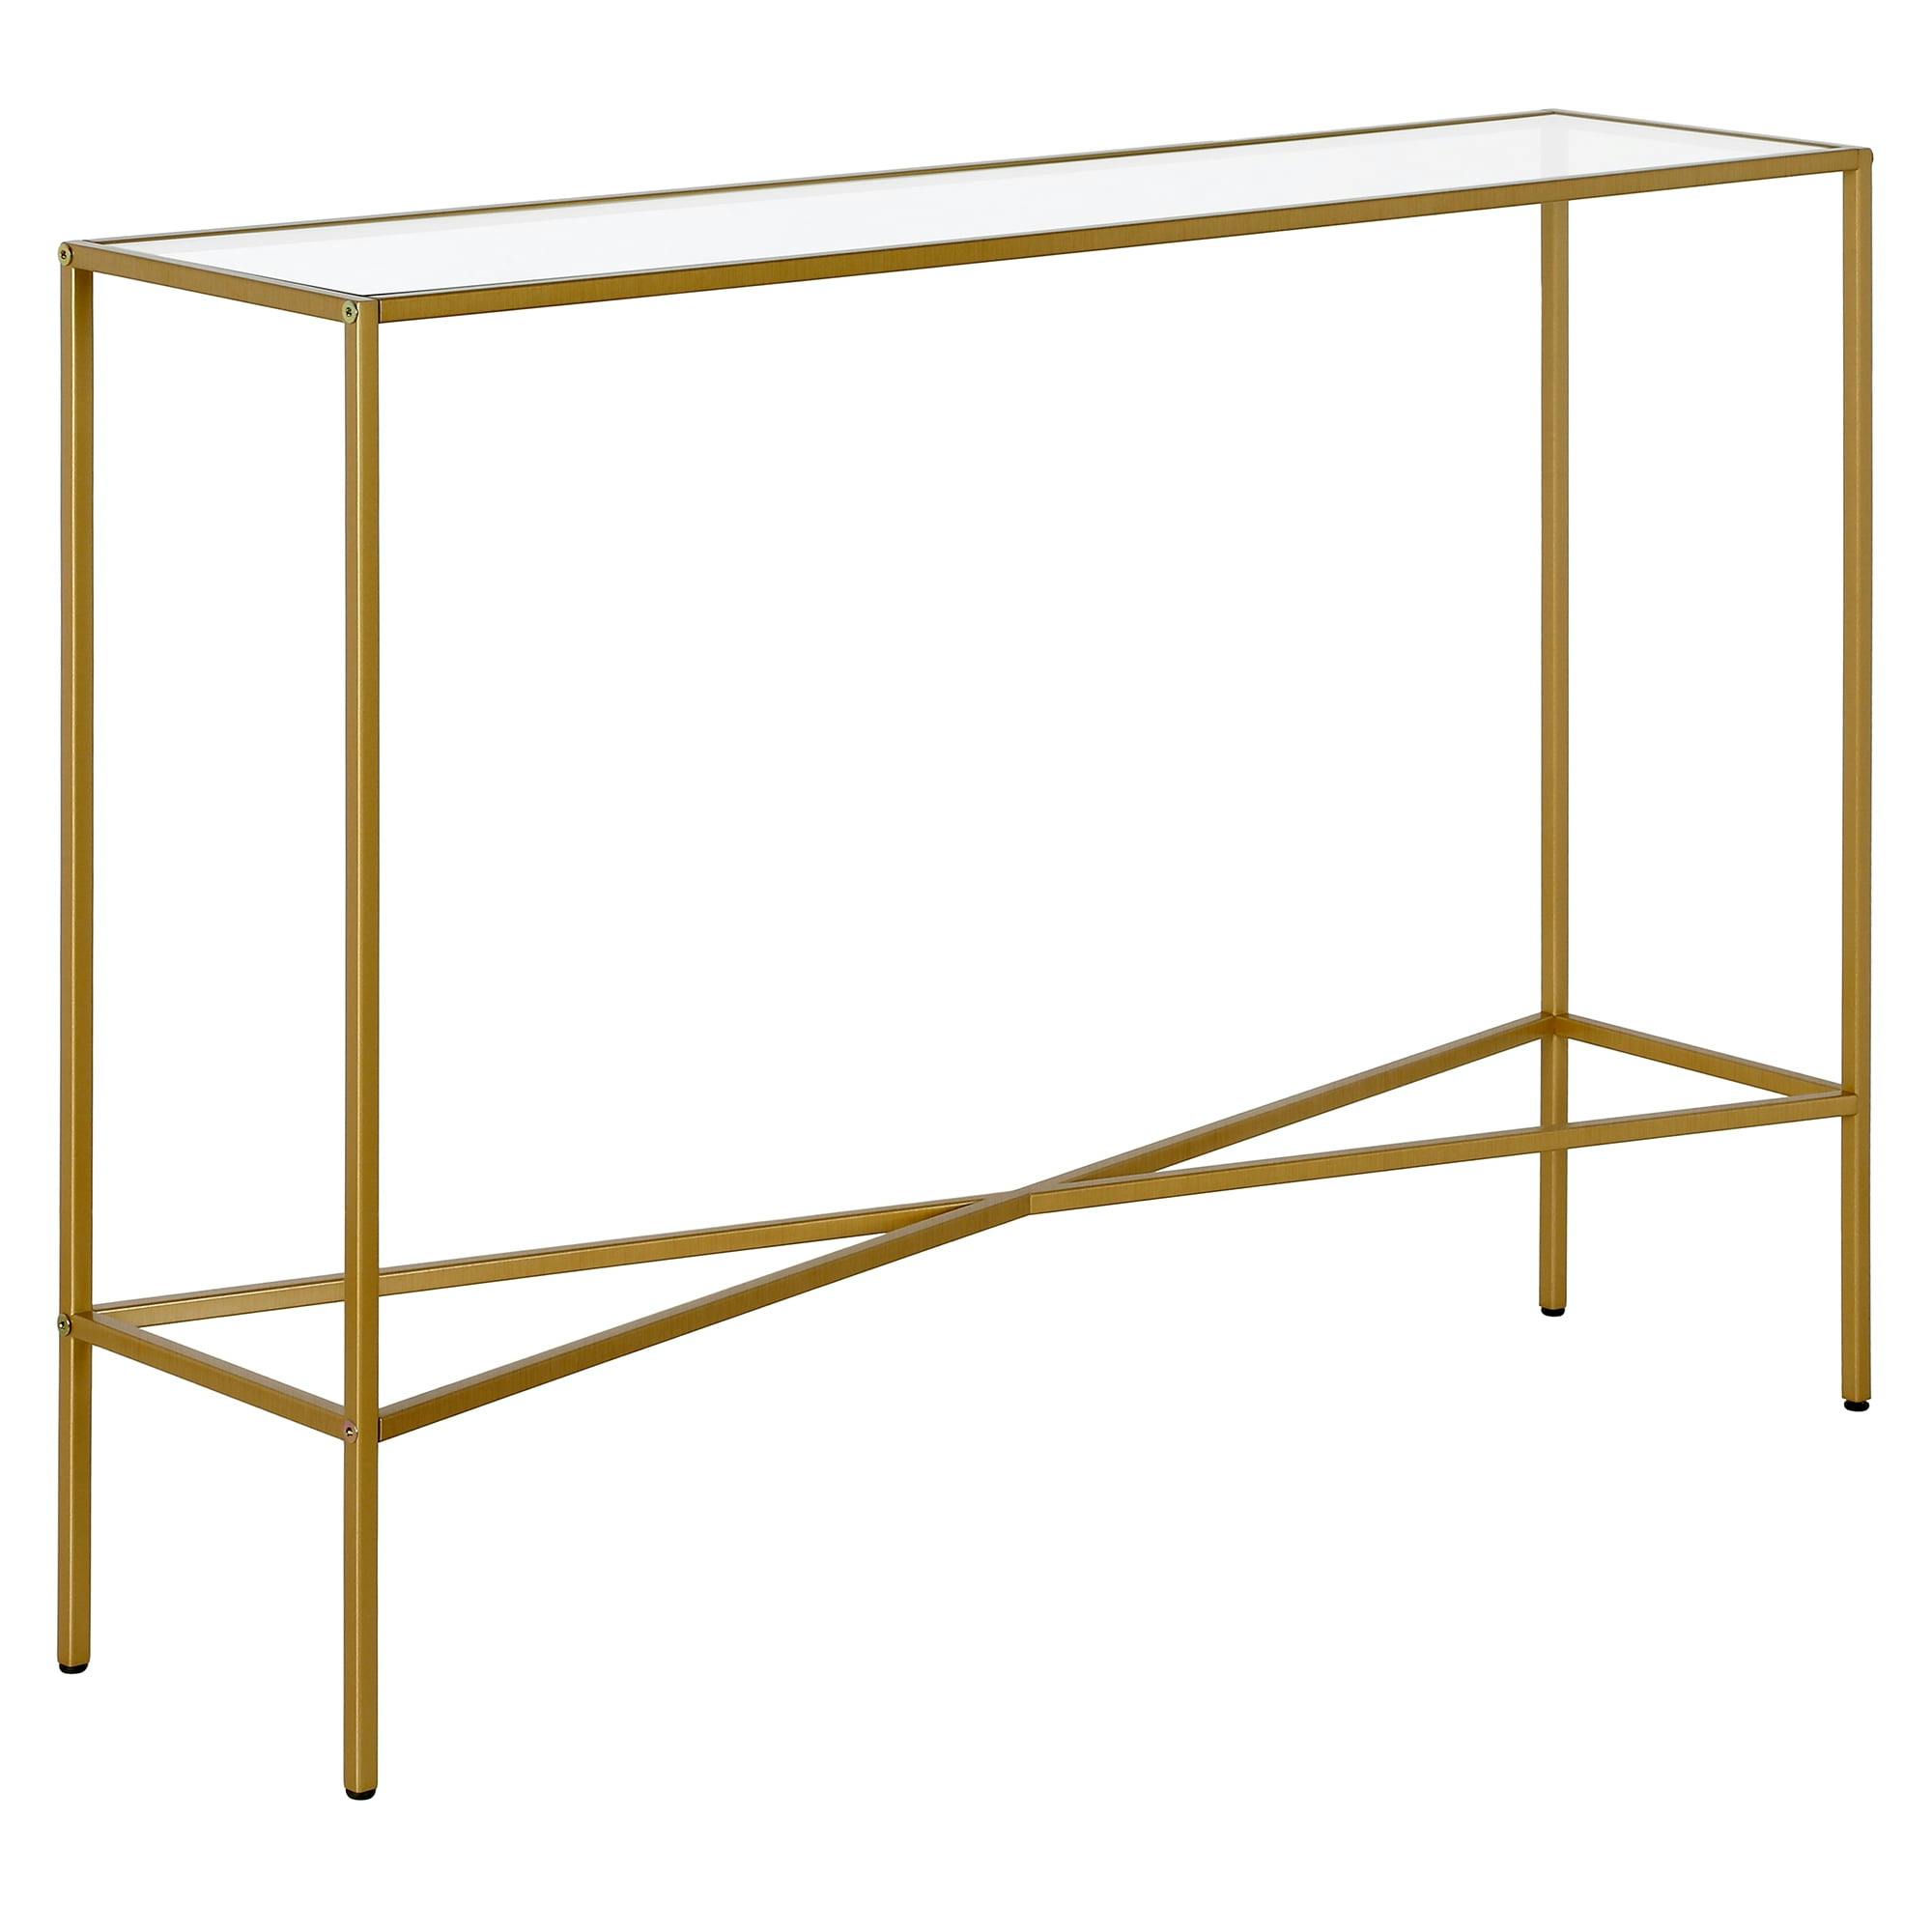 Modern Industrial Brass & Glass Console Table - 42" Wide